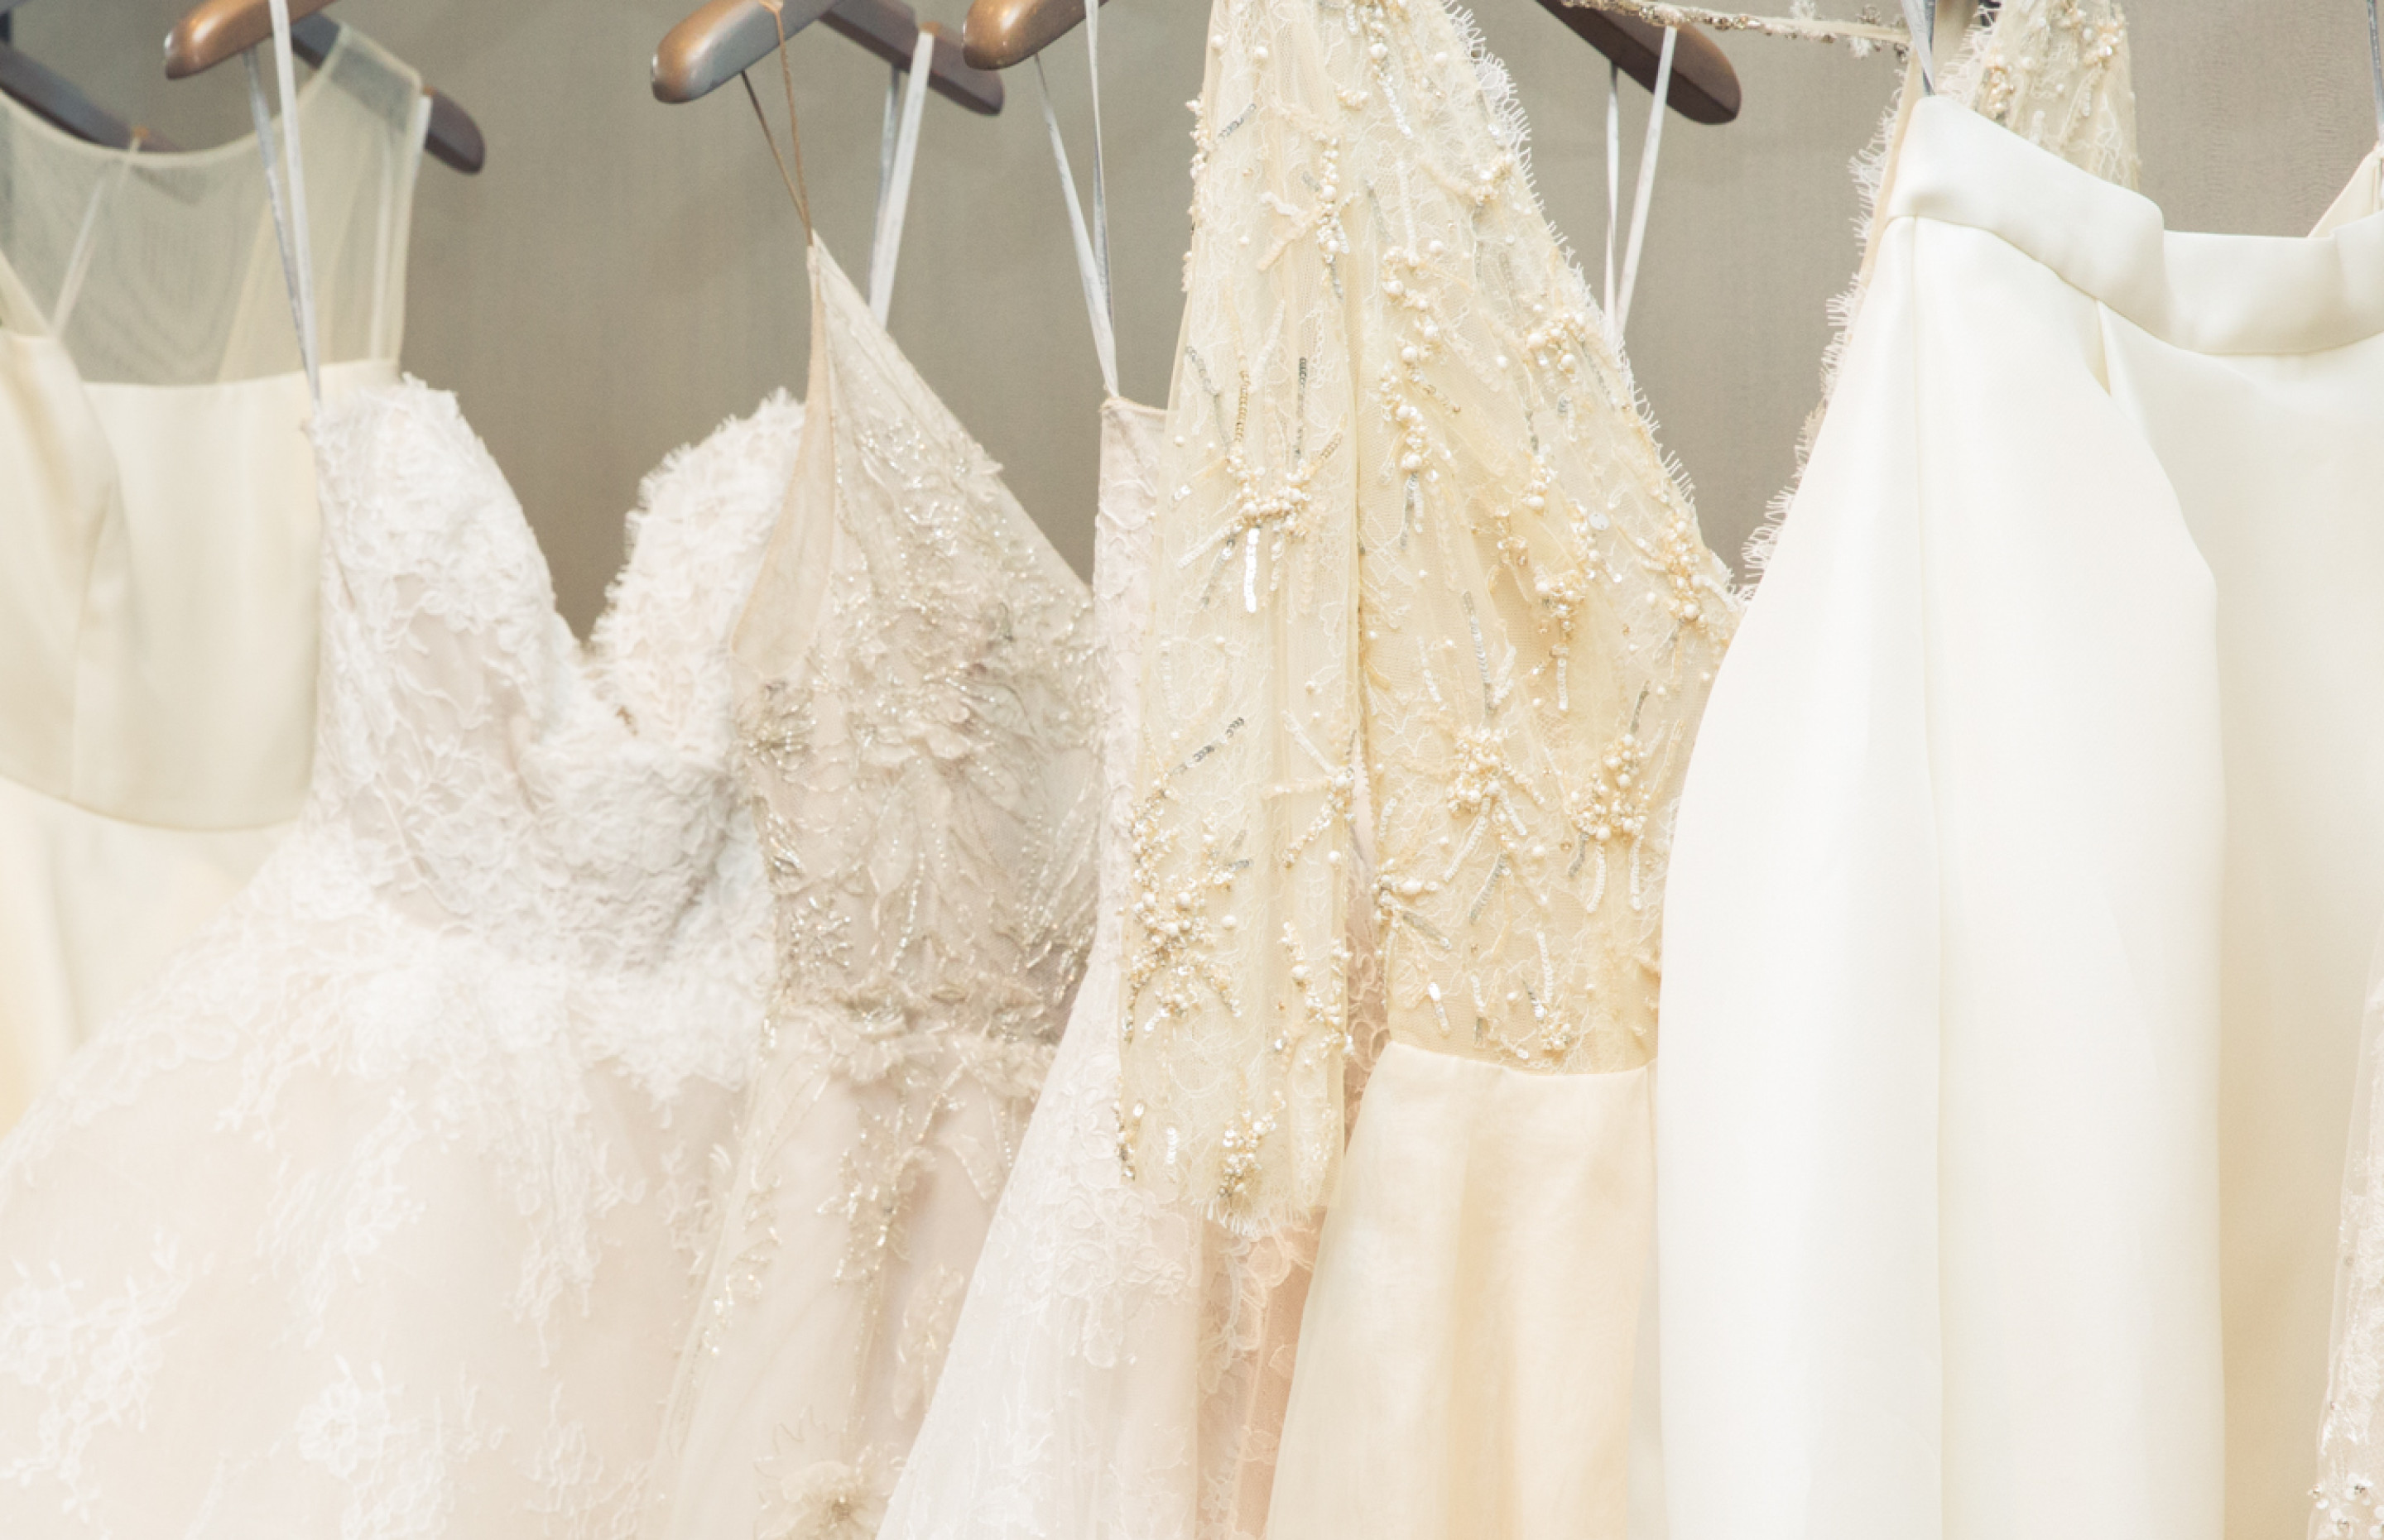 Wedding Dress Hire: What You Need to Know